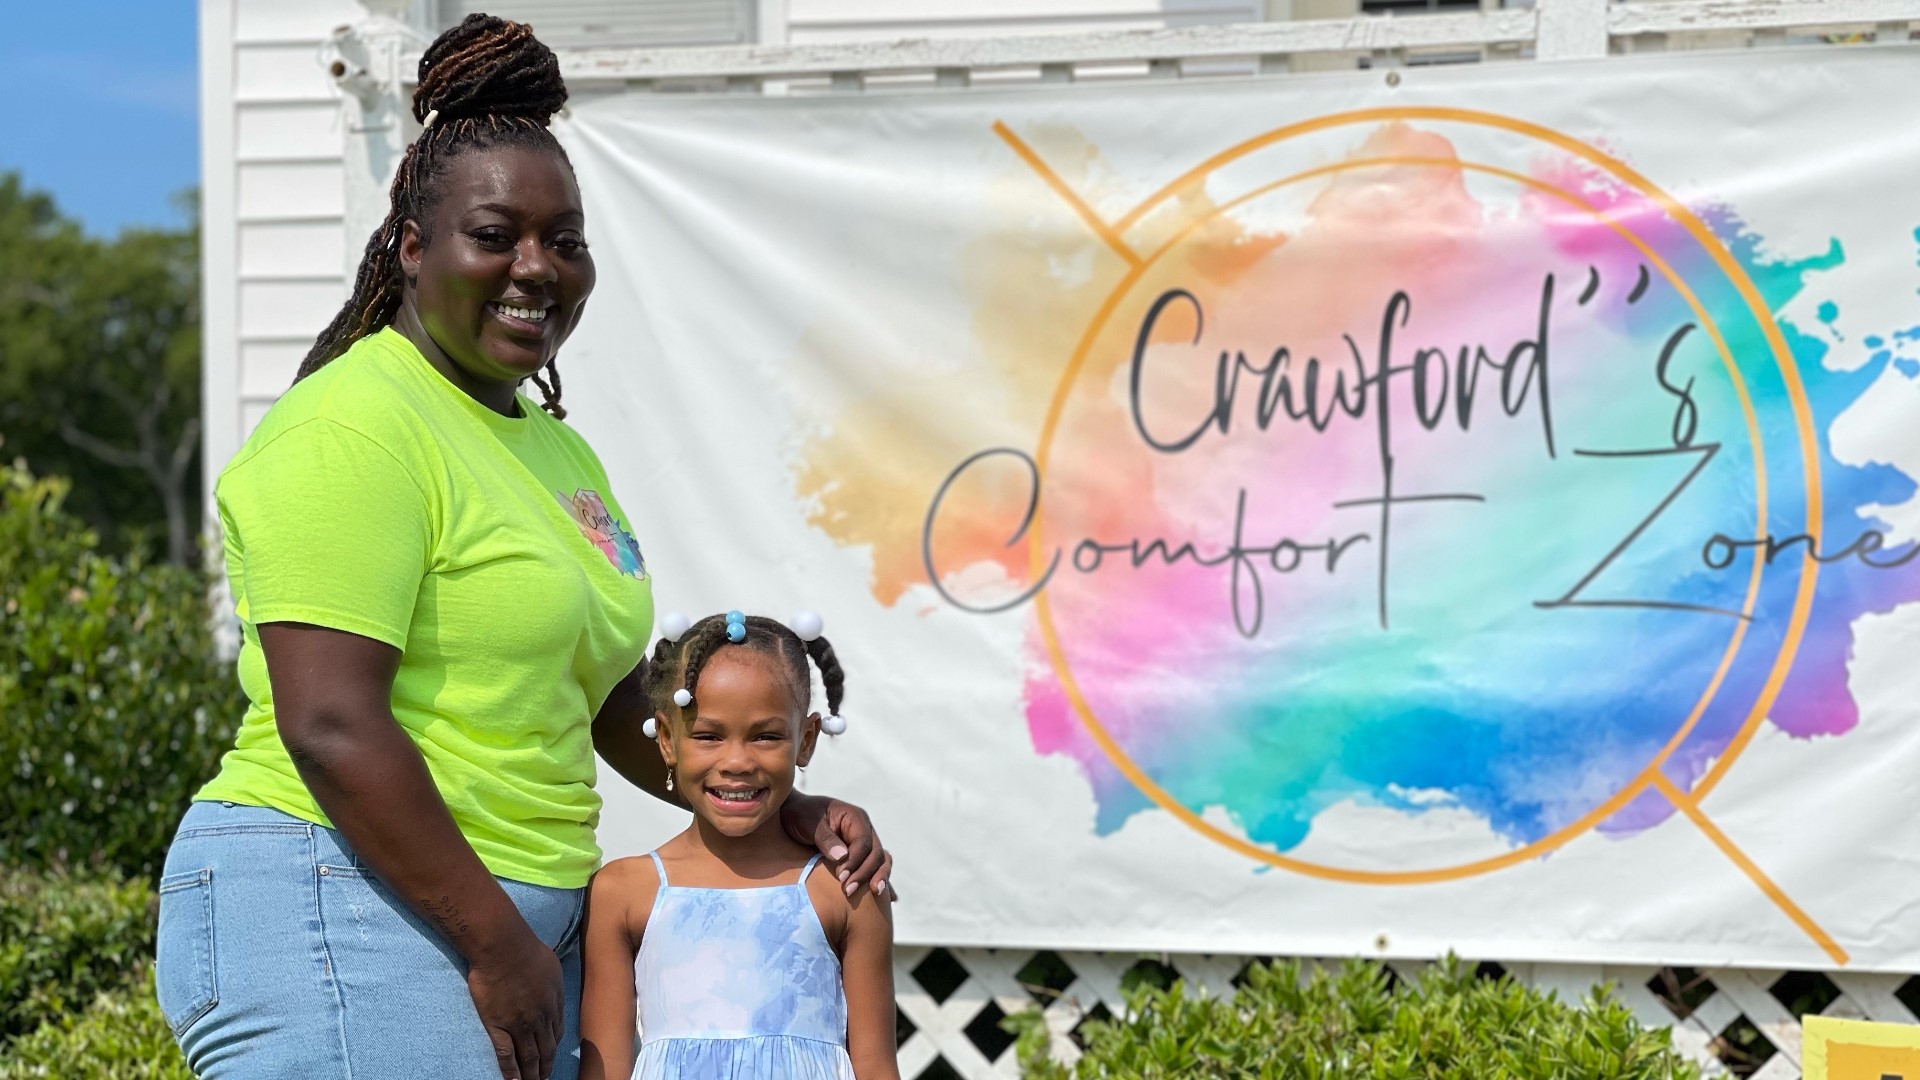 Crawford Comfort Zone provides homework help and tutoring from two retired teachers who have volunteered their time, as well as devotion time